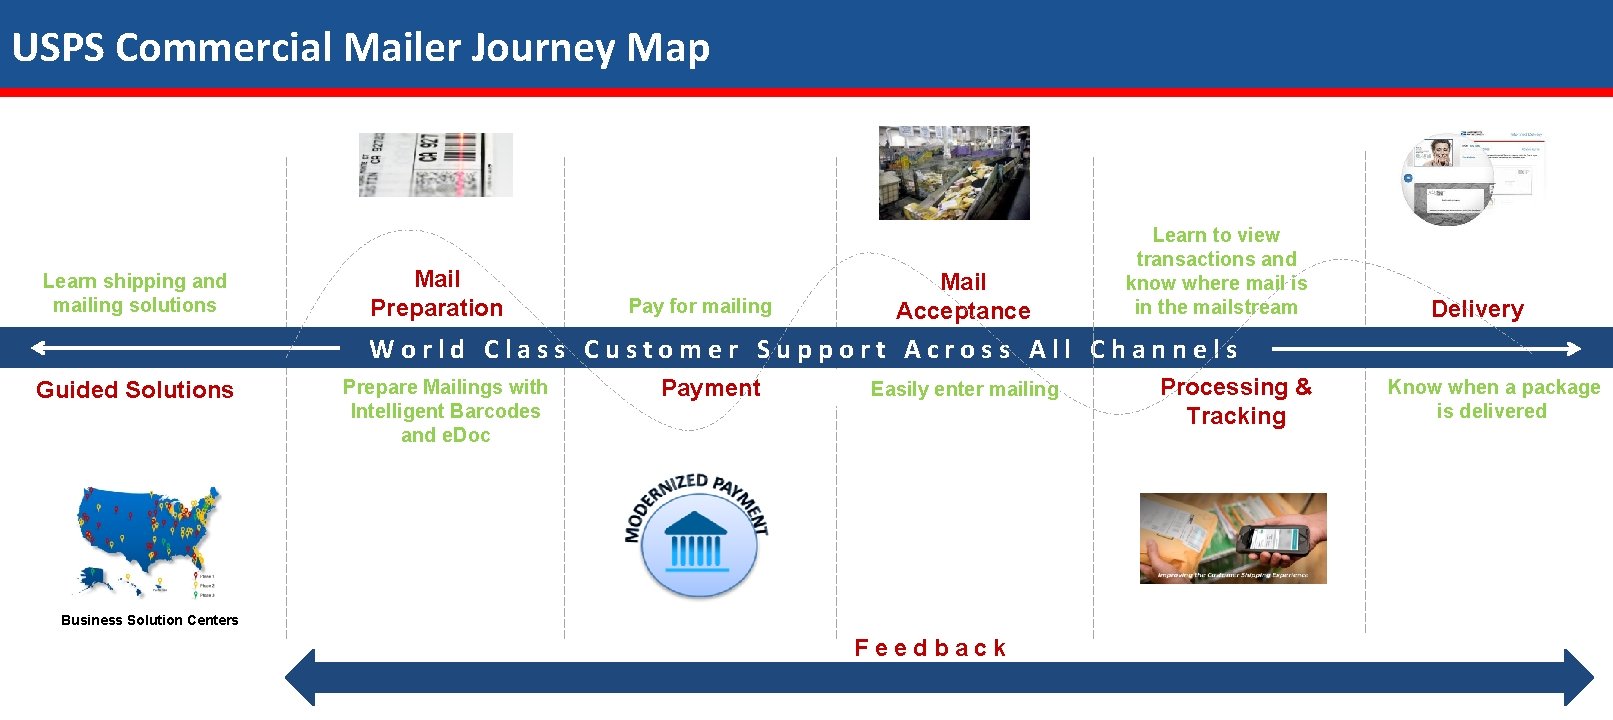 USPS Commercial Mailer Journey Map Learn shipping and mailing solutions Mail Preparation Pay for